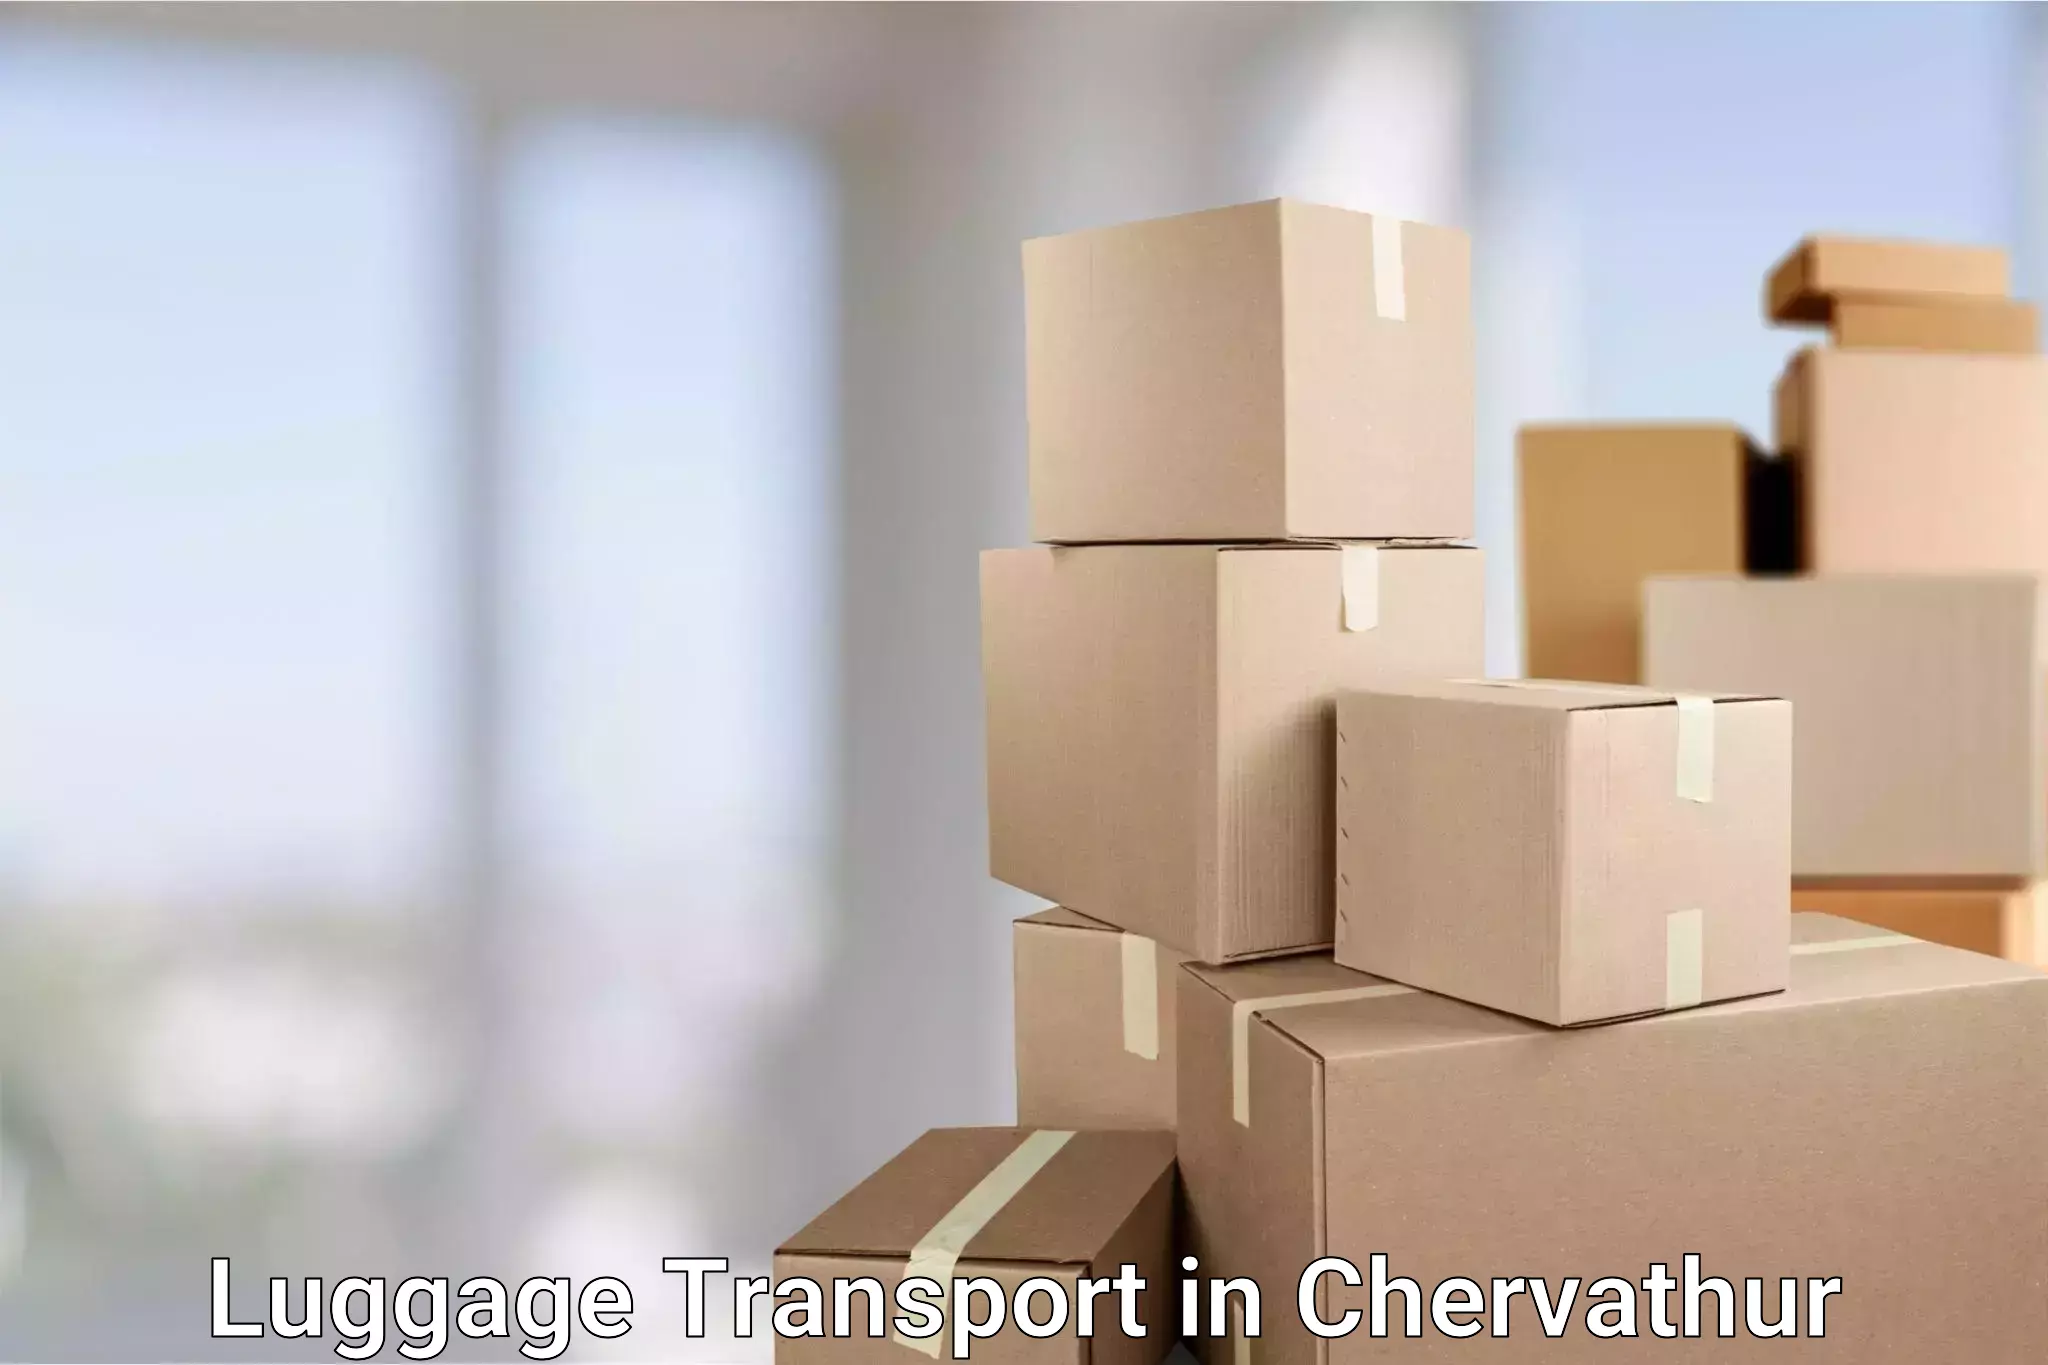 Baggage delivery management in Chervathur